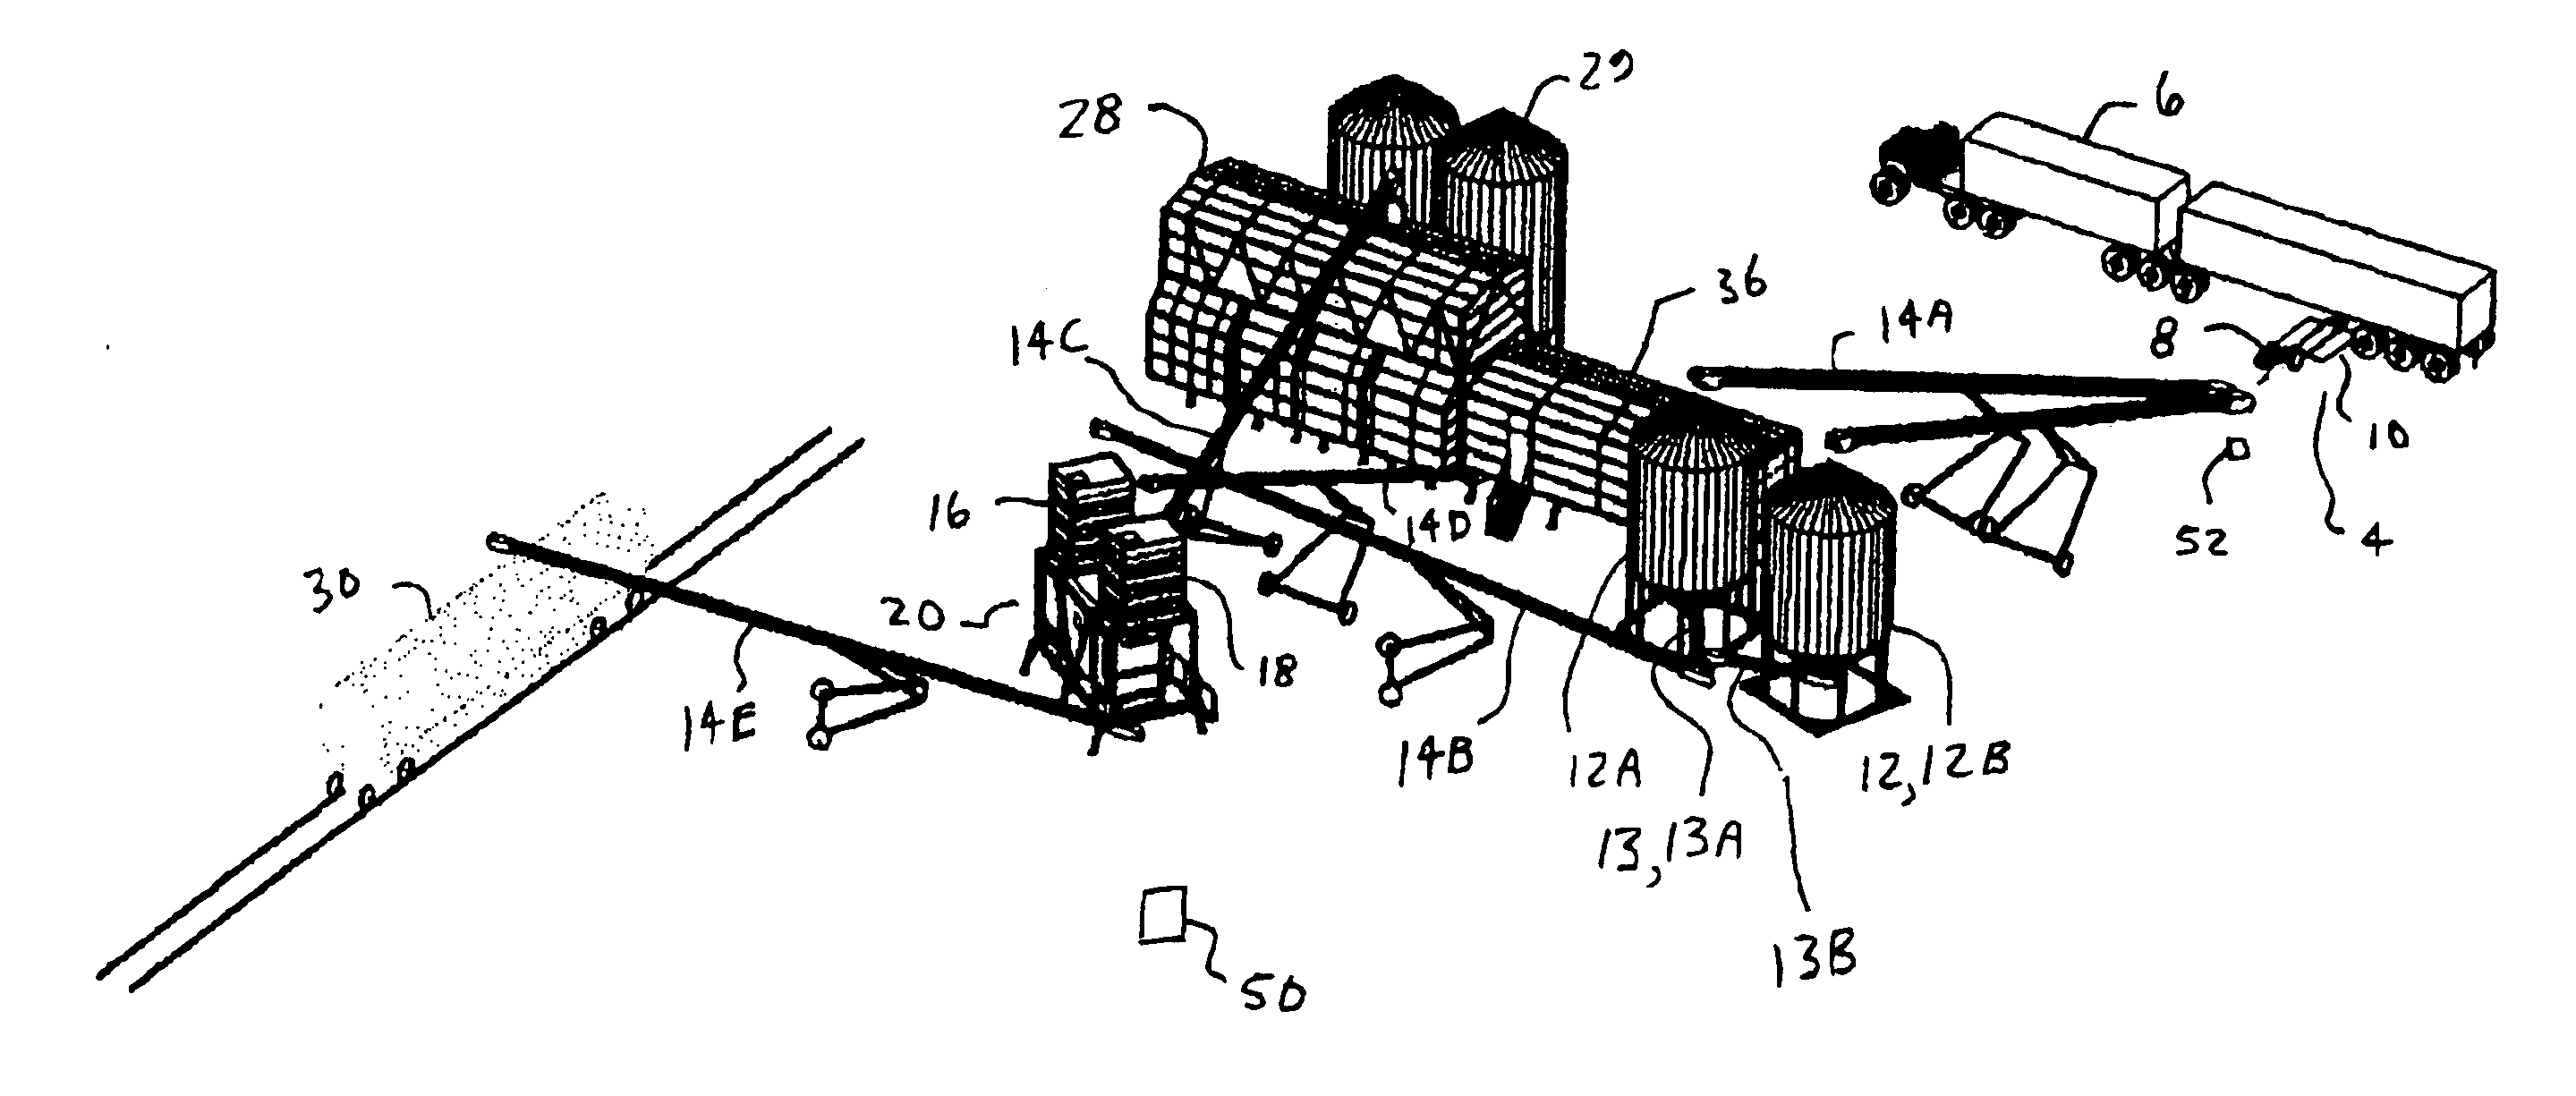 Method and apparatus for moving agricultural commodities